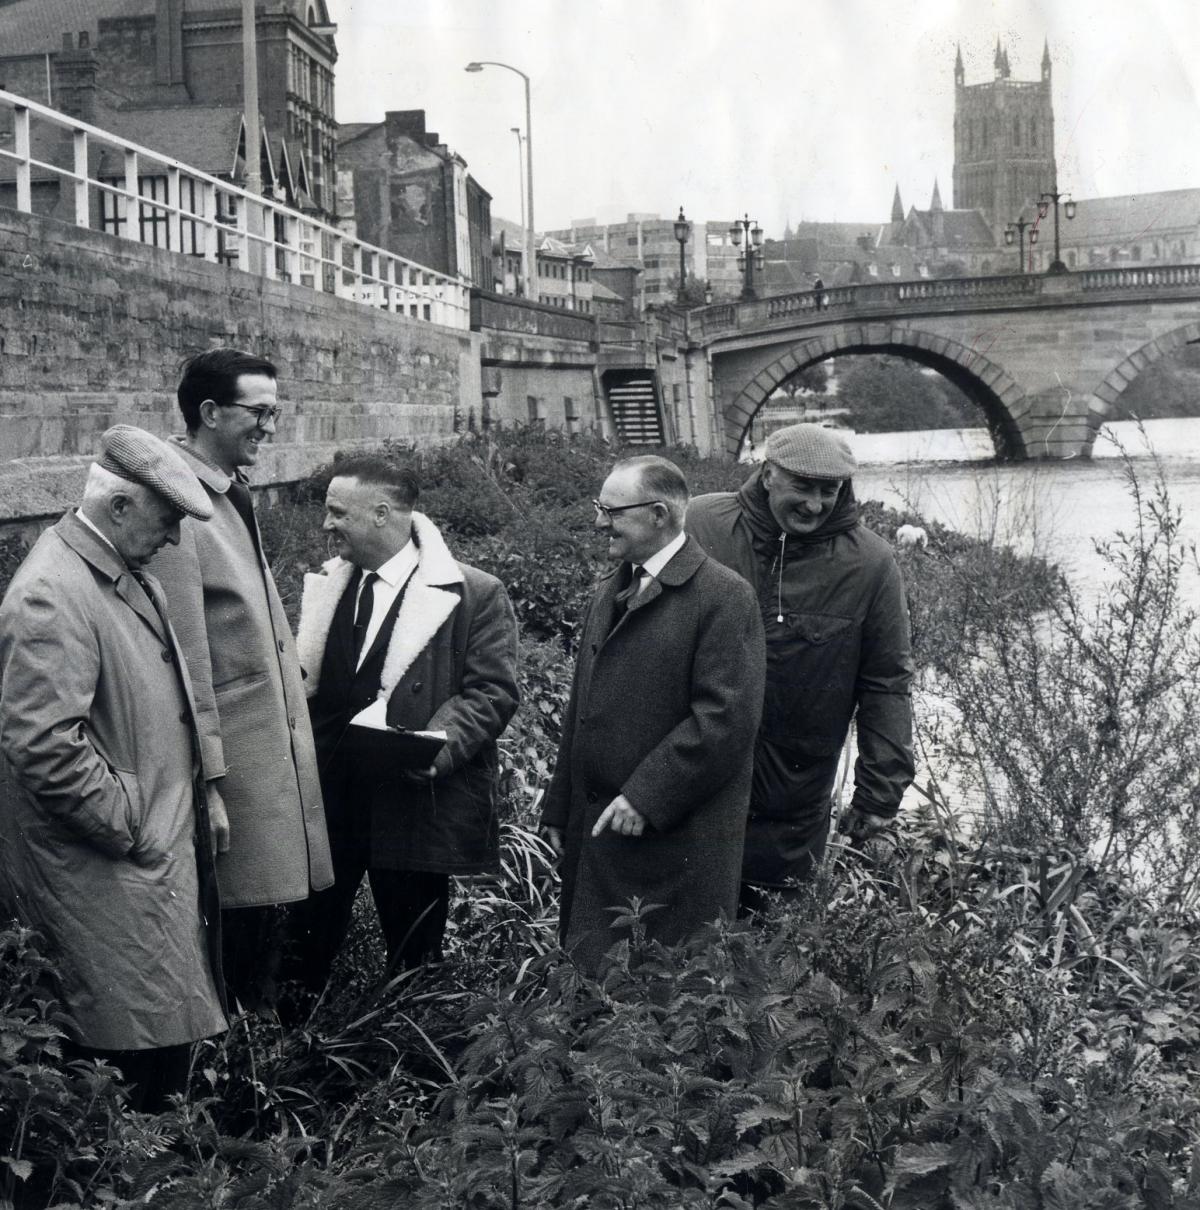 TAKEN on what was obviously a chilly May day in 1967 here are four gentlemen belonging to an organisation known as the River Severn Preservation Association on a tour of the waterway before a dredging operation began.